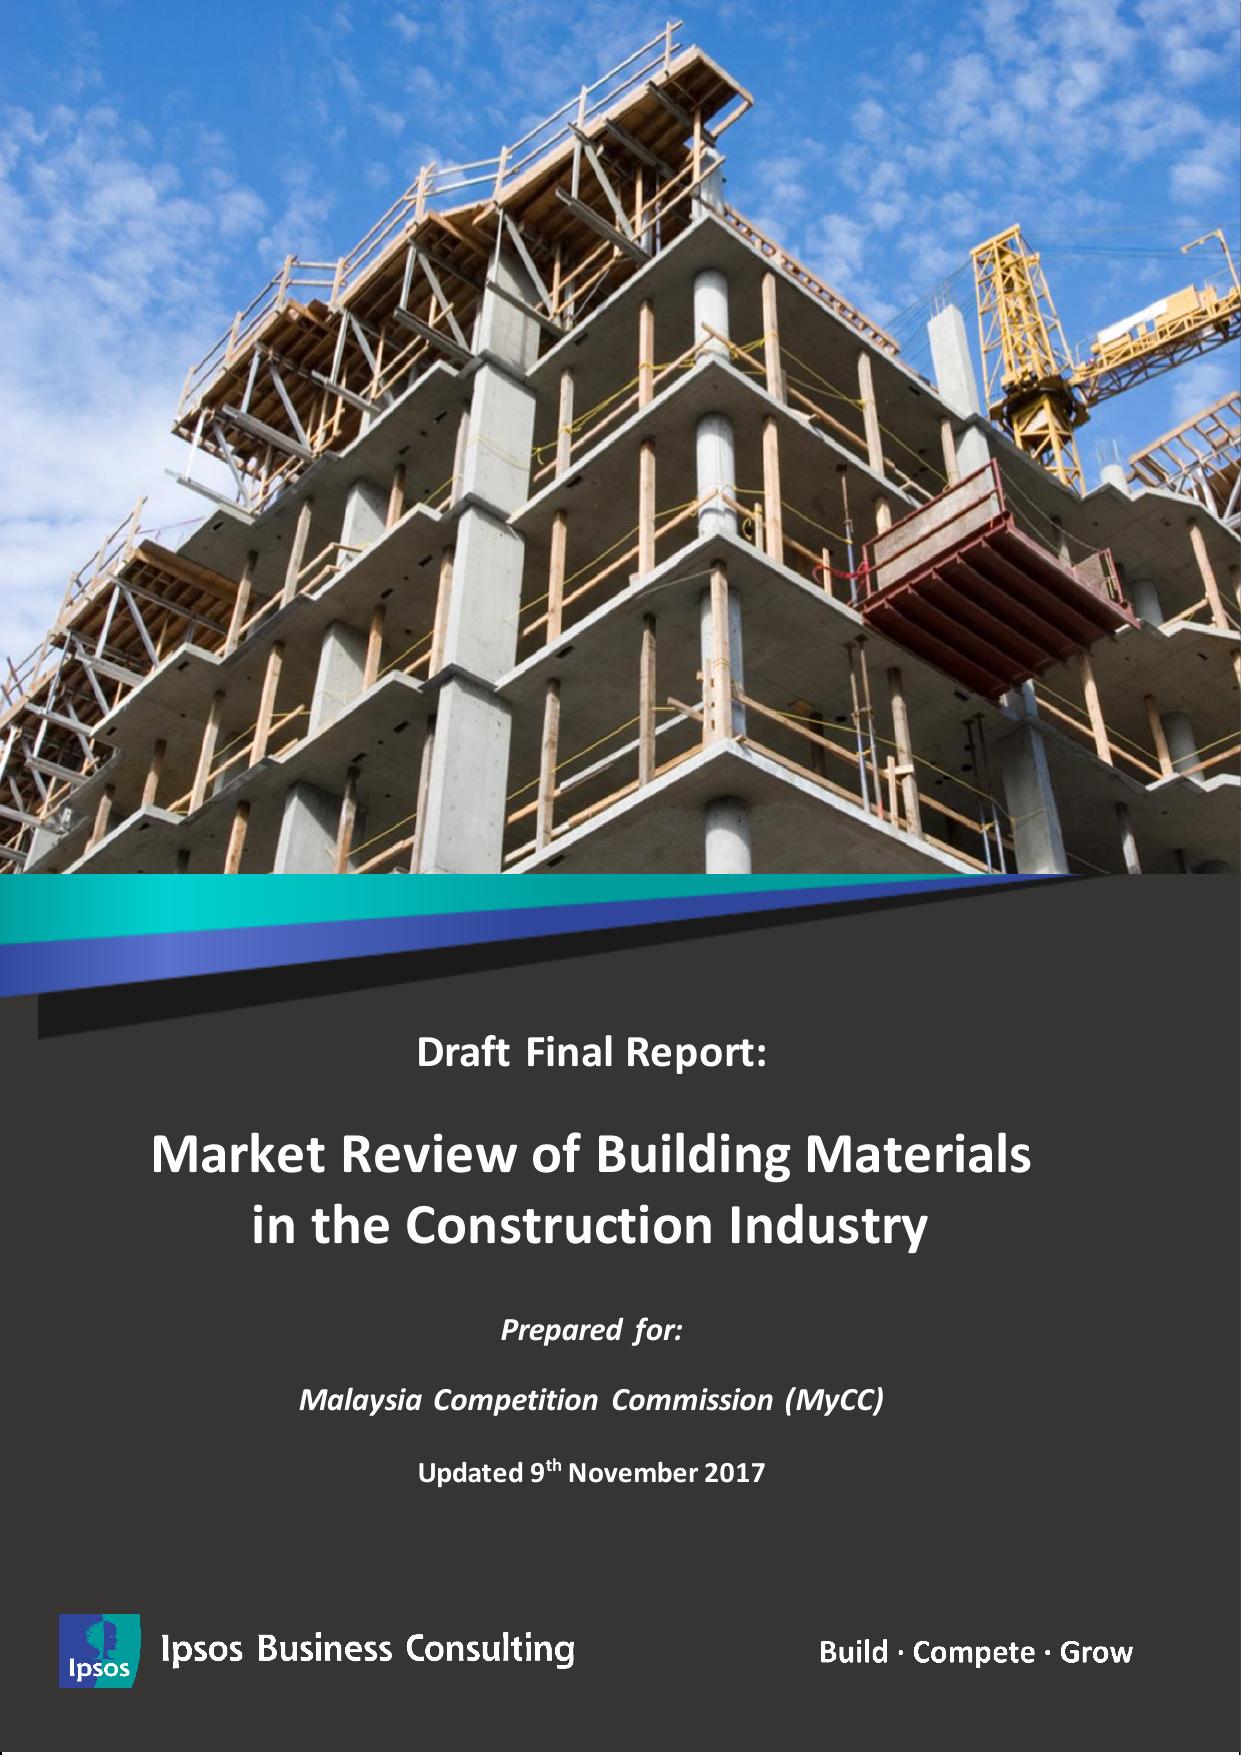 Market Review of Building Materials in the Construction Industry 2017